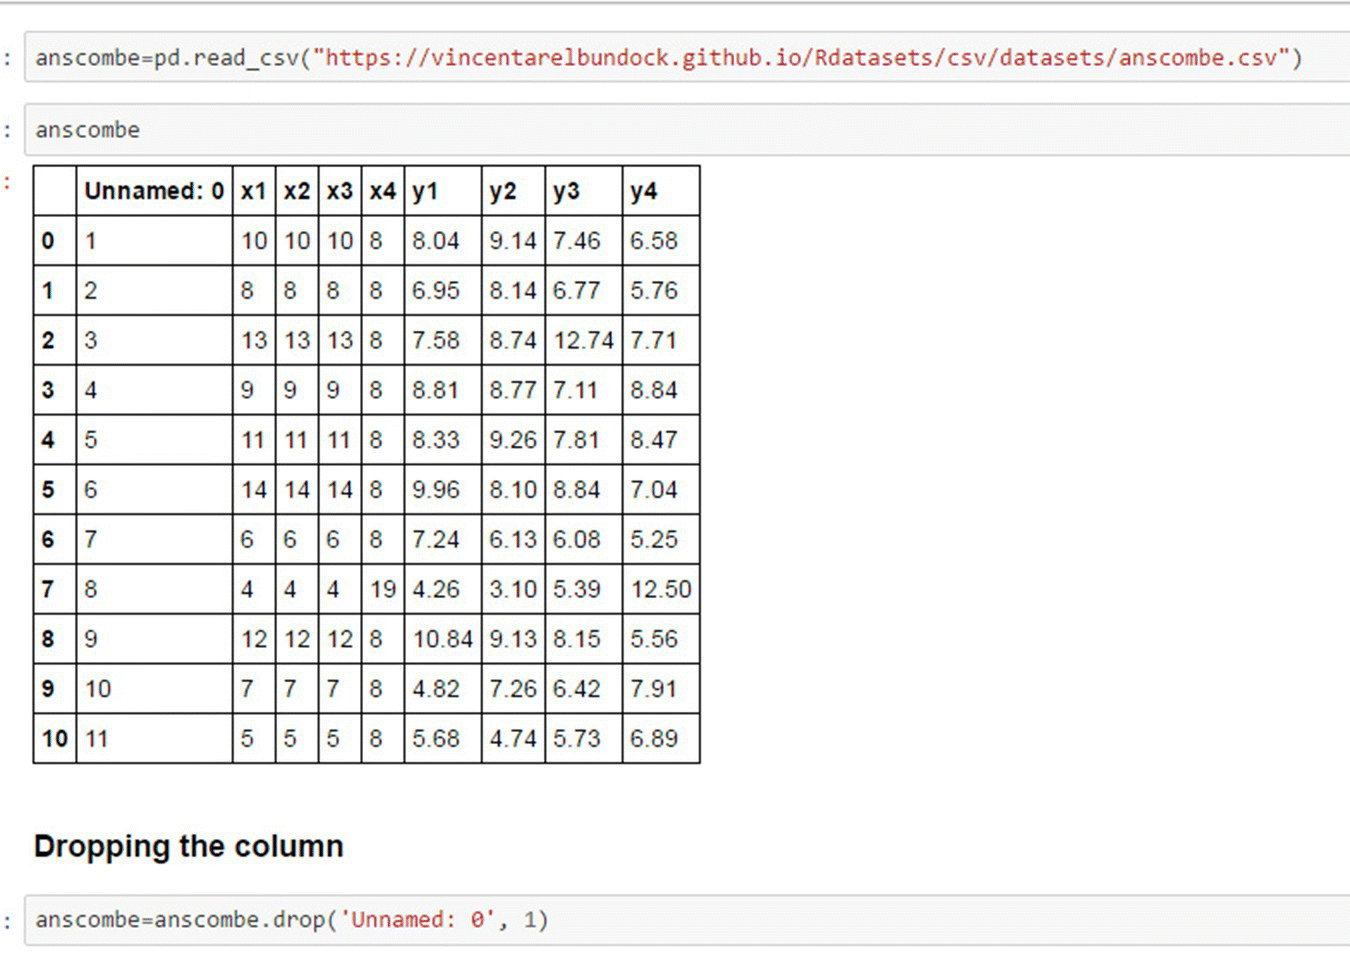 Snipped image displaying the pandas data frame containing the formats for reading in data, with a table with 9 columns and 11 rows labeled unnamed, x1, x2, x3, x4, y1, y2, y3, and y4, and numbers 0–1, respectively.